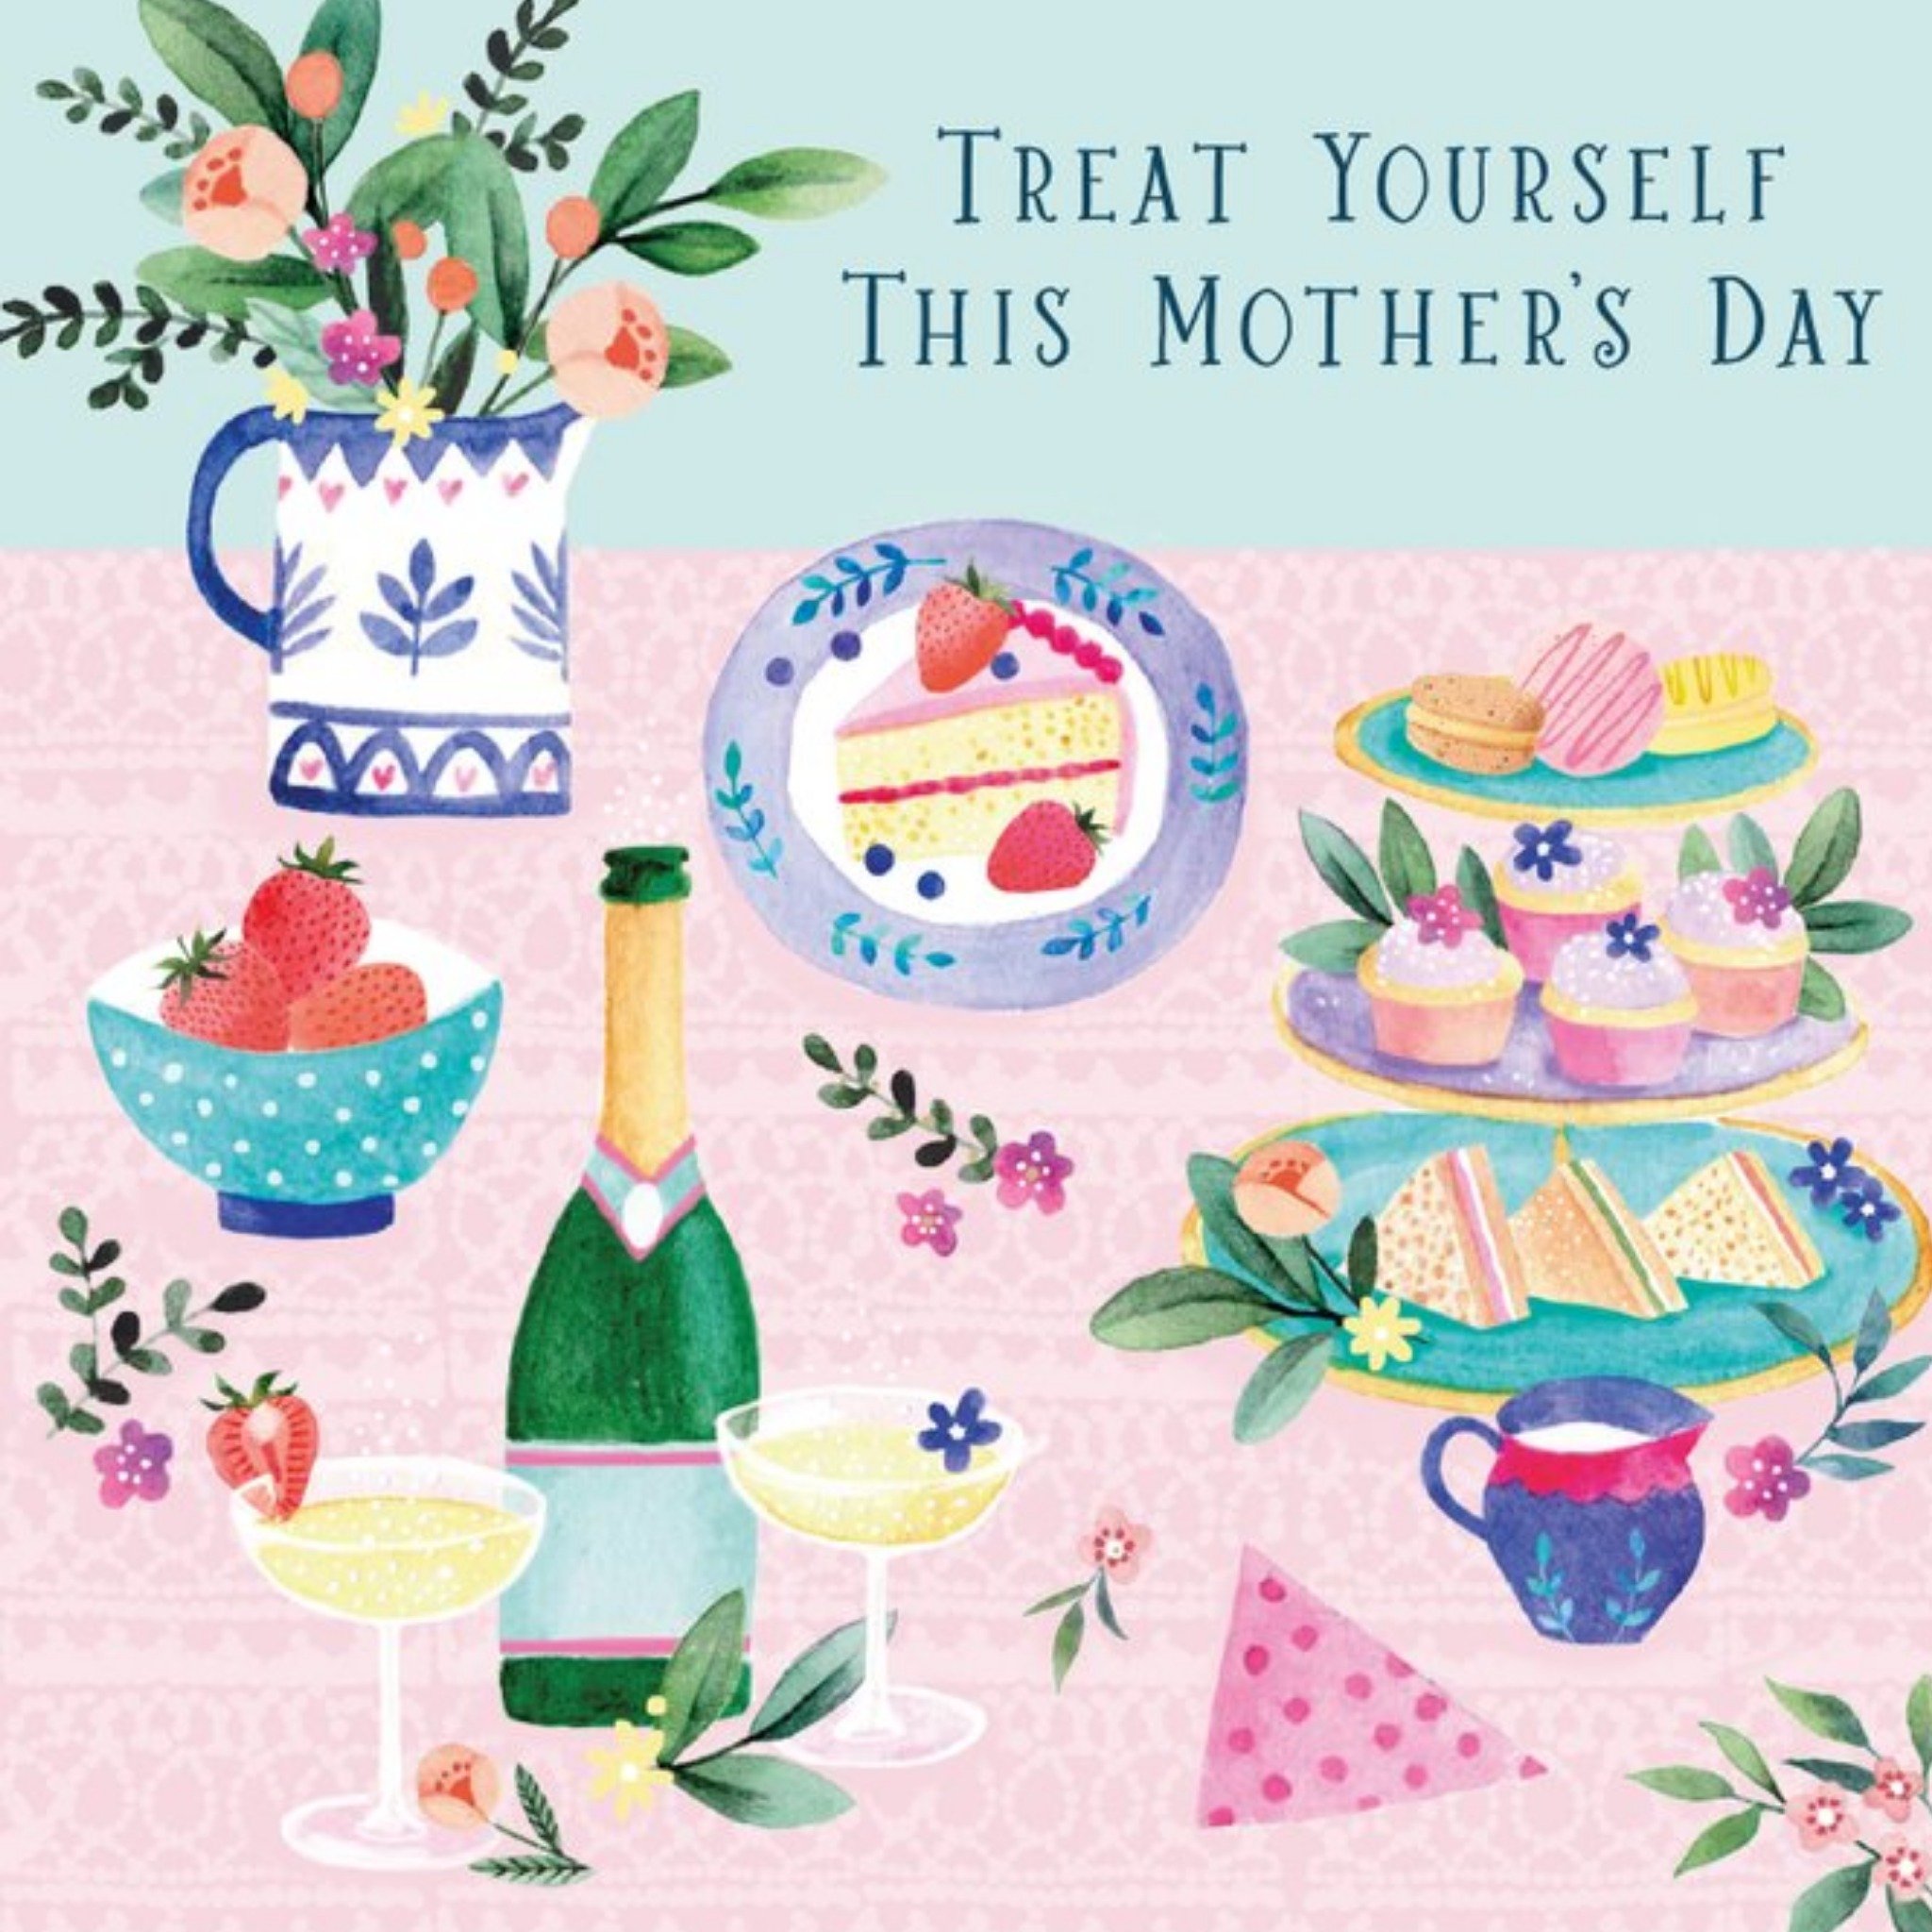 Moonpig Pigment Cute Illustration Treat Yourself Mother's Day Card, Square